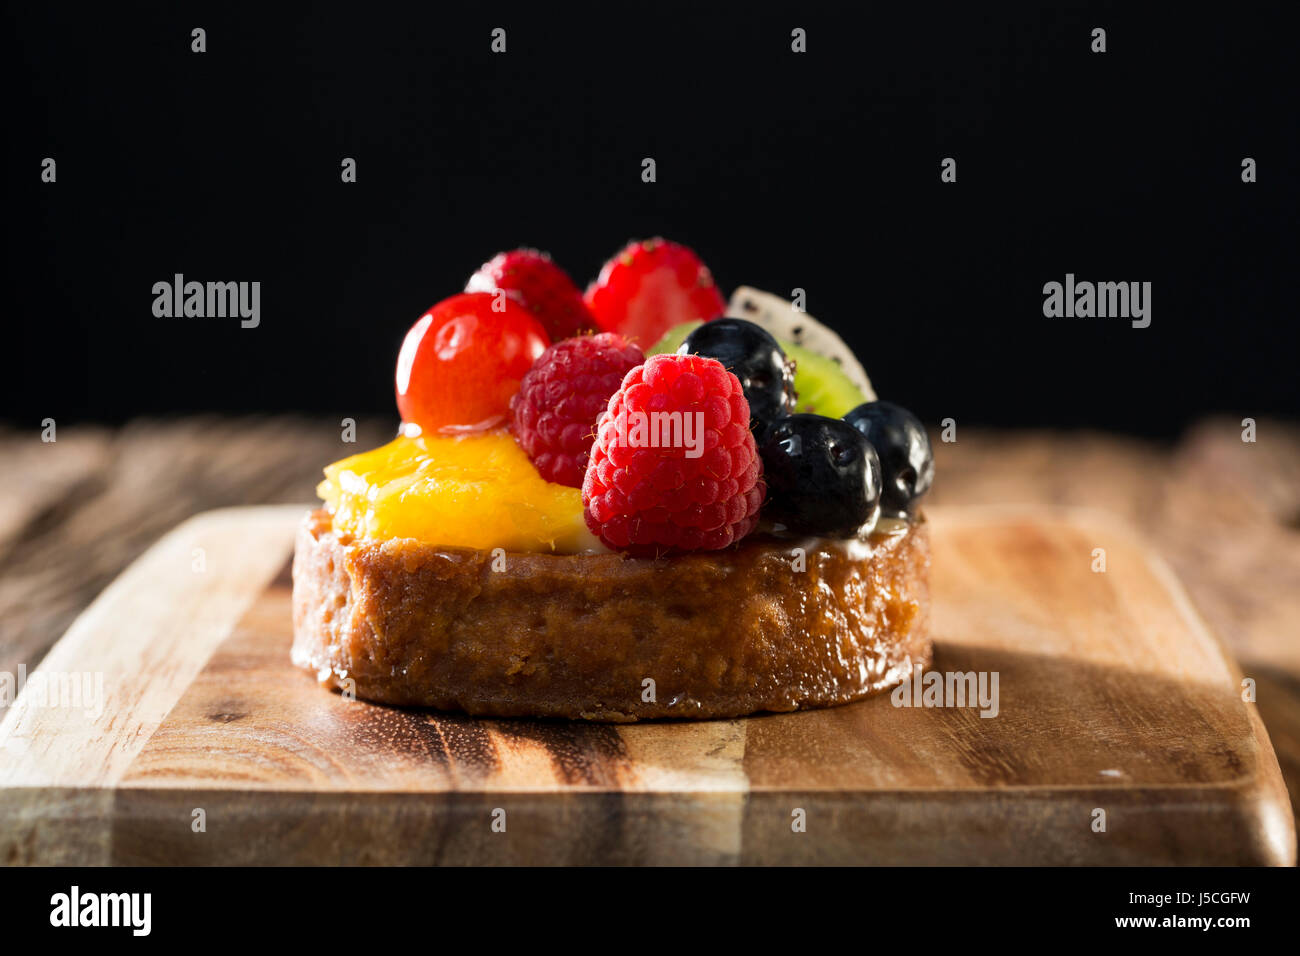 Fresh Fruit Flan sitting on a rustic wooden table. Stock Photo